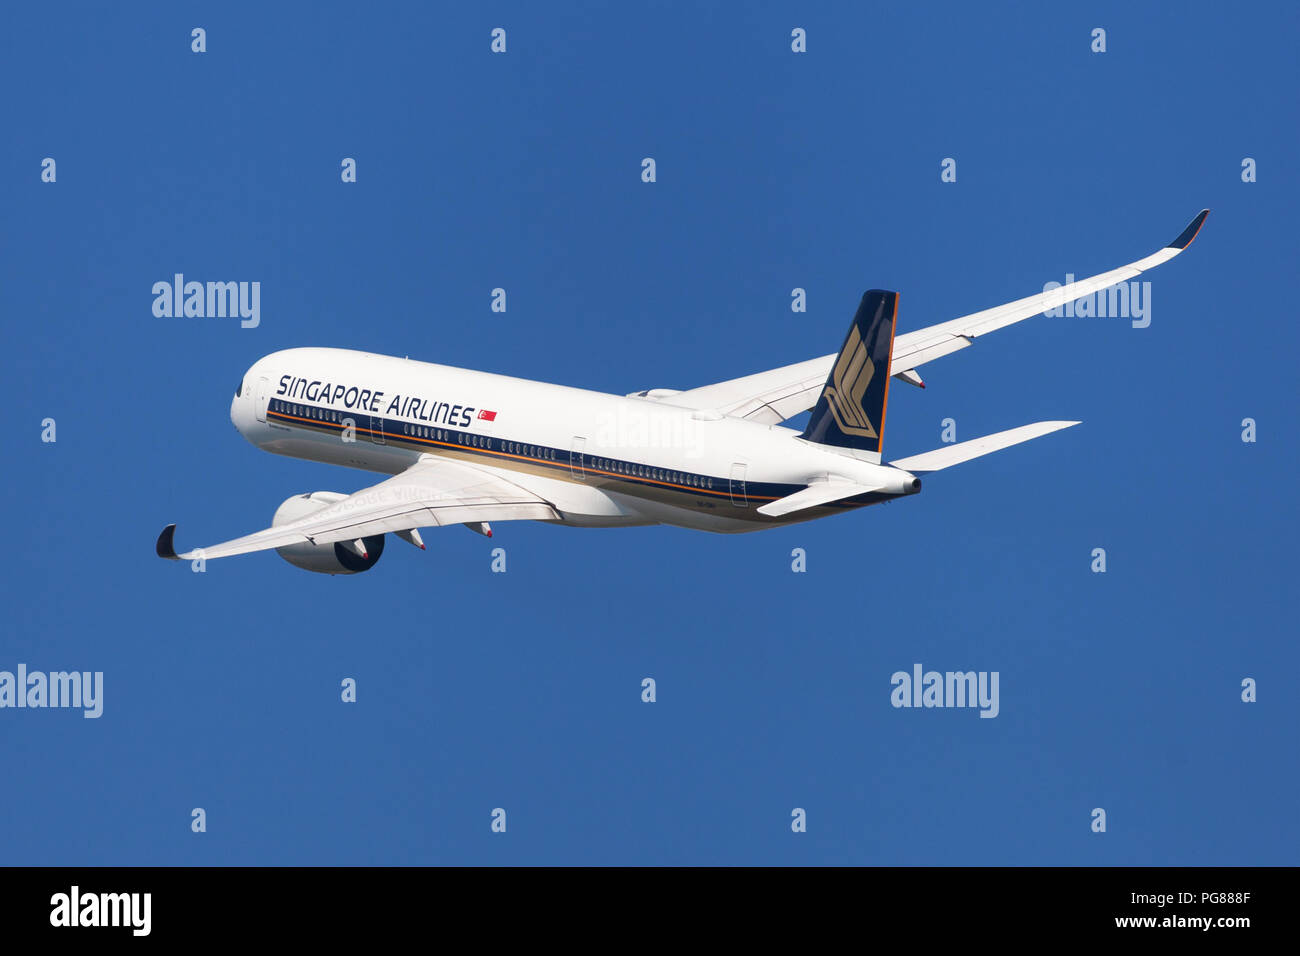 Barcelona, Spain - August 20, 2018: Singapore Airlines Airbus A350-900 banking left after taking off from El Prat Airport in Barcelona, Spain. Stock Photo